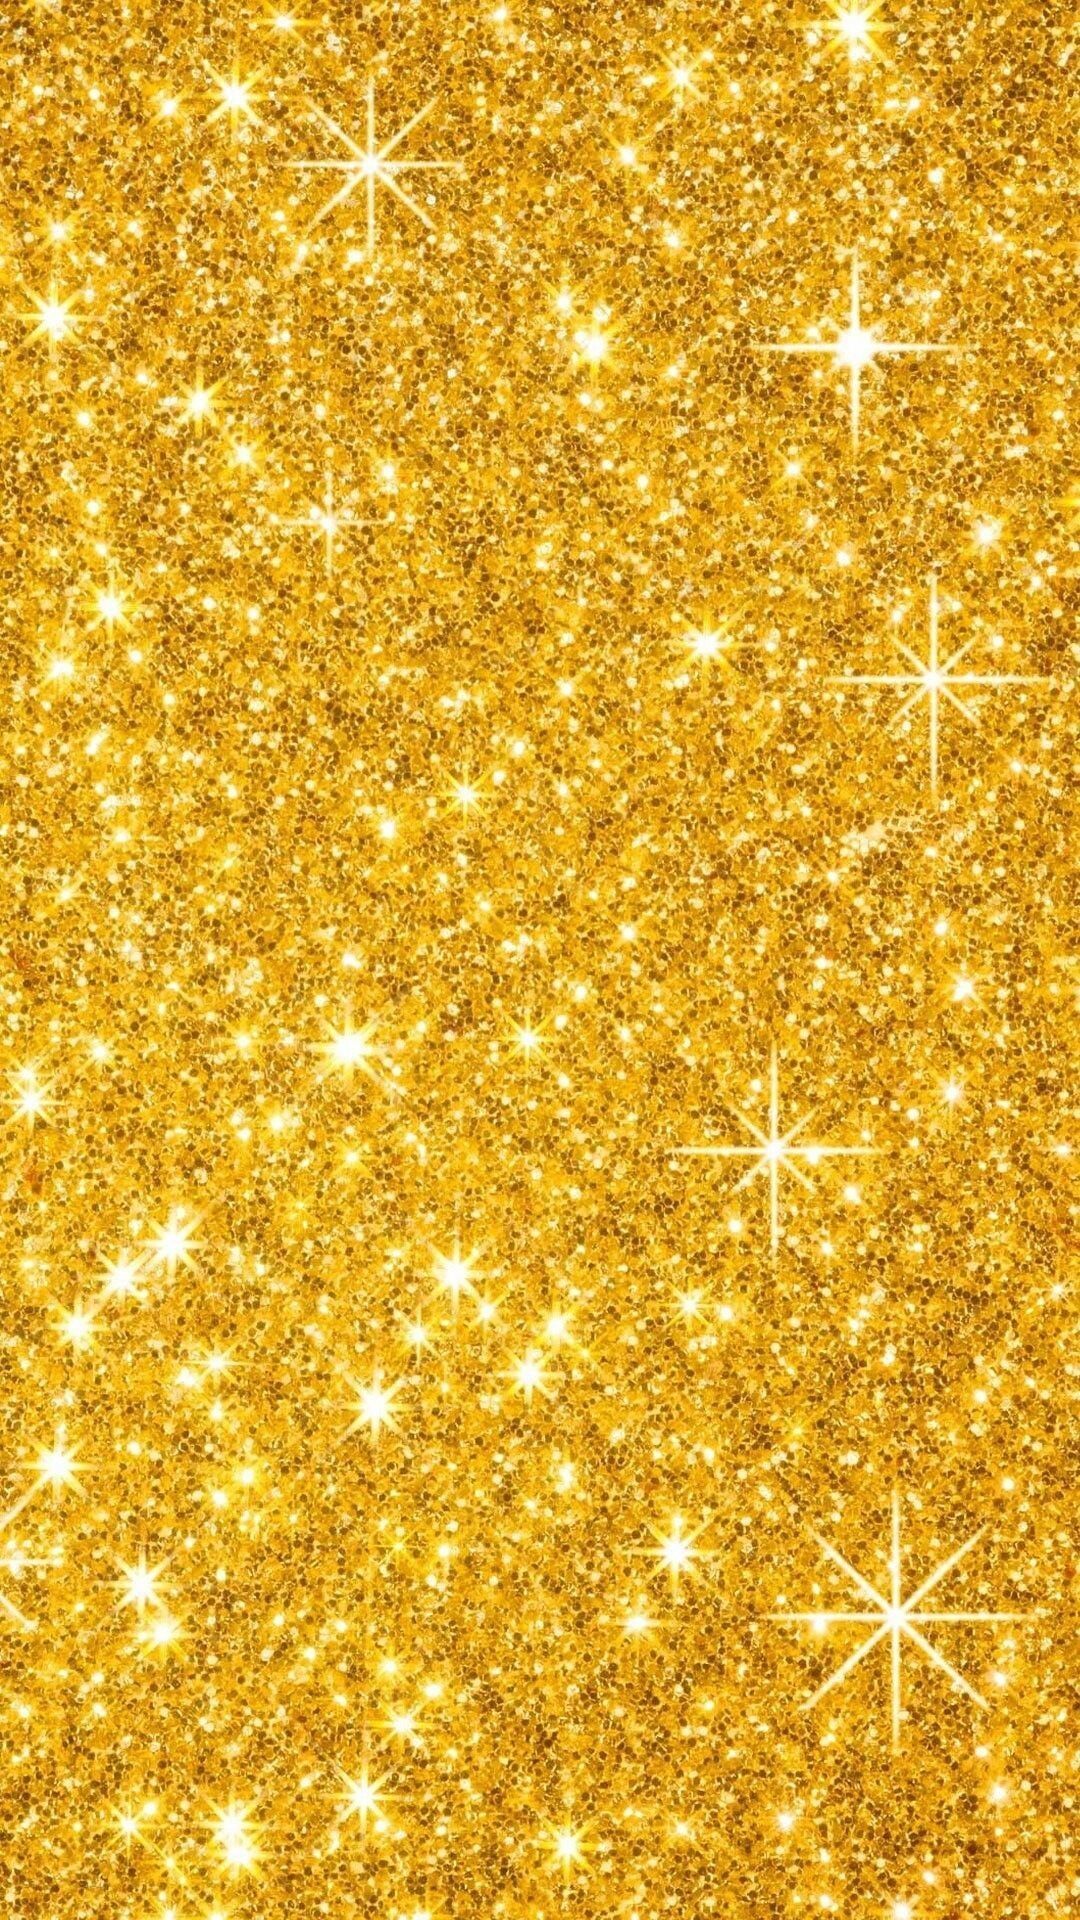 Gold Sparkle: Small pieces of glitter substance, Shining brightly with little flashes of light. 1080x1920 Full HD Background.